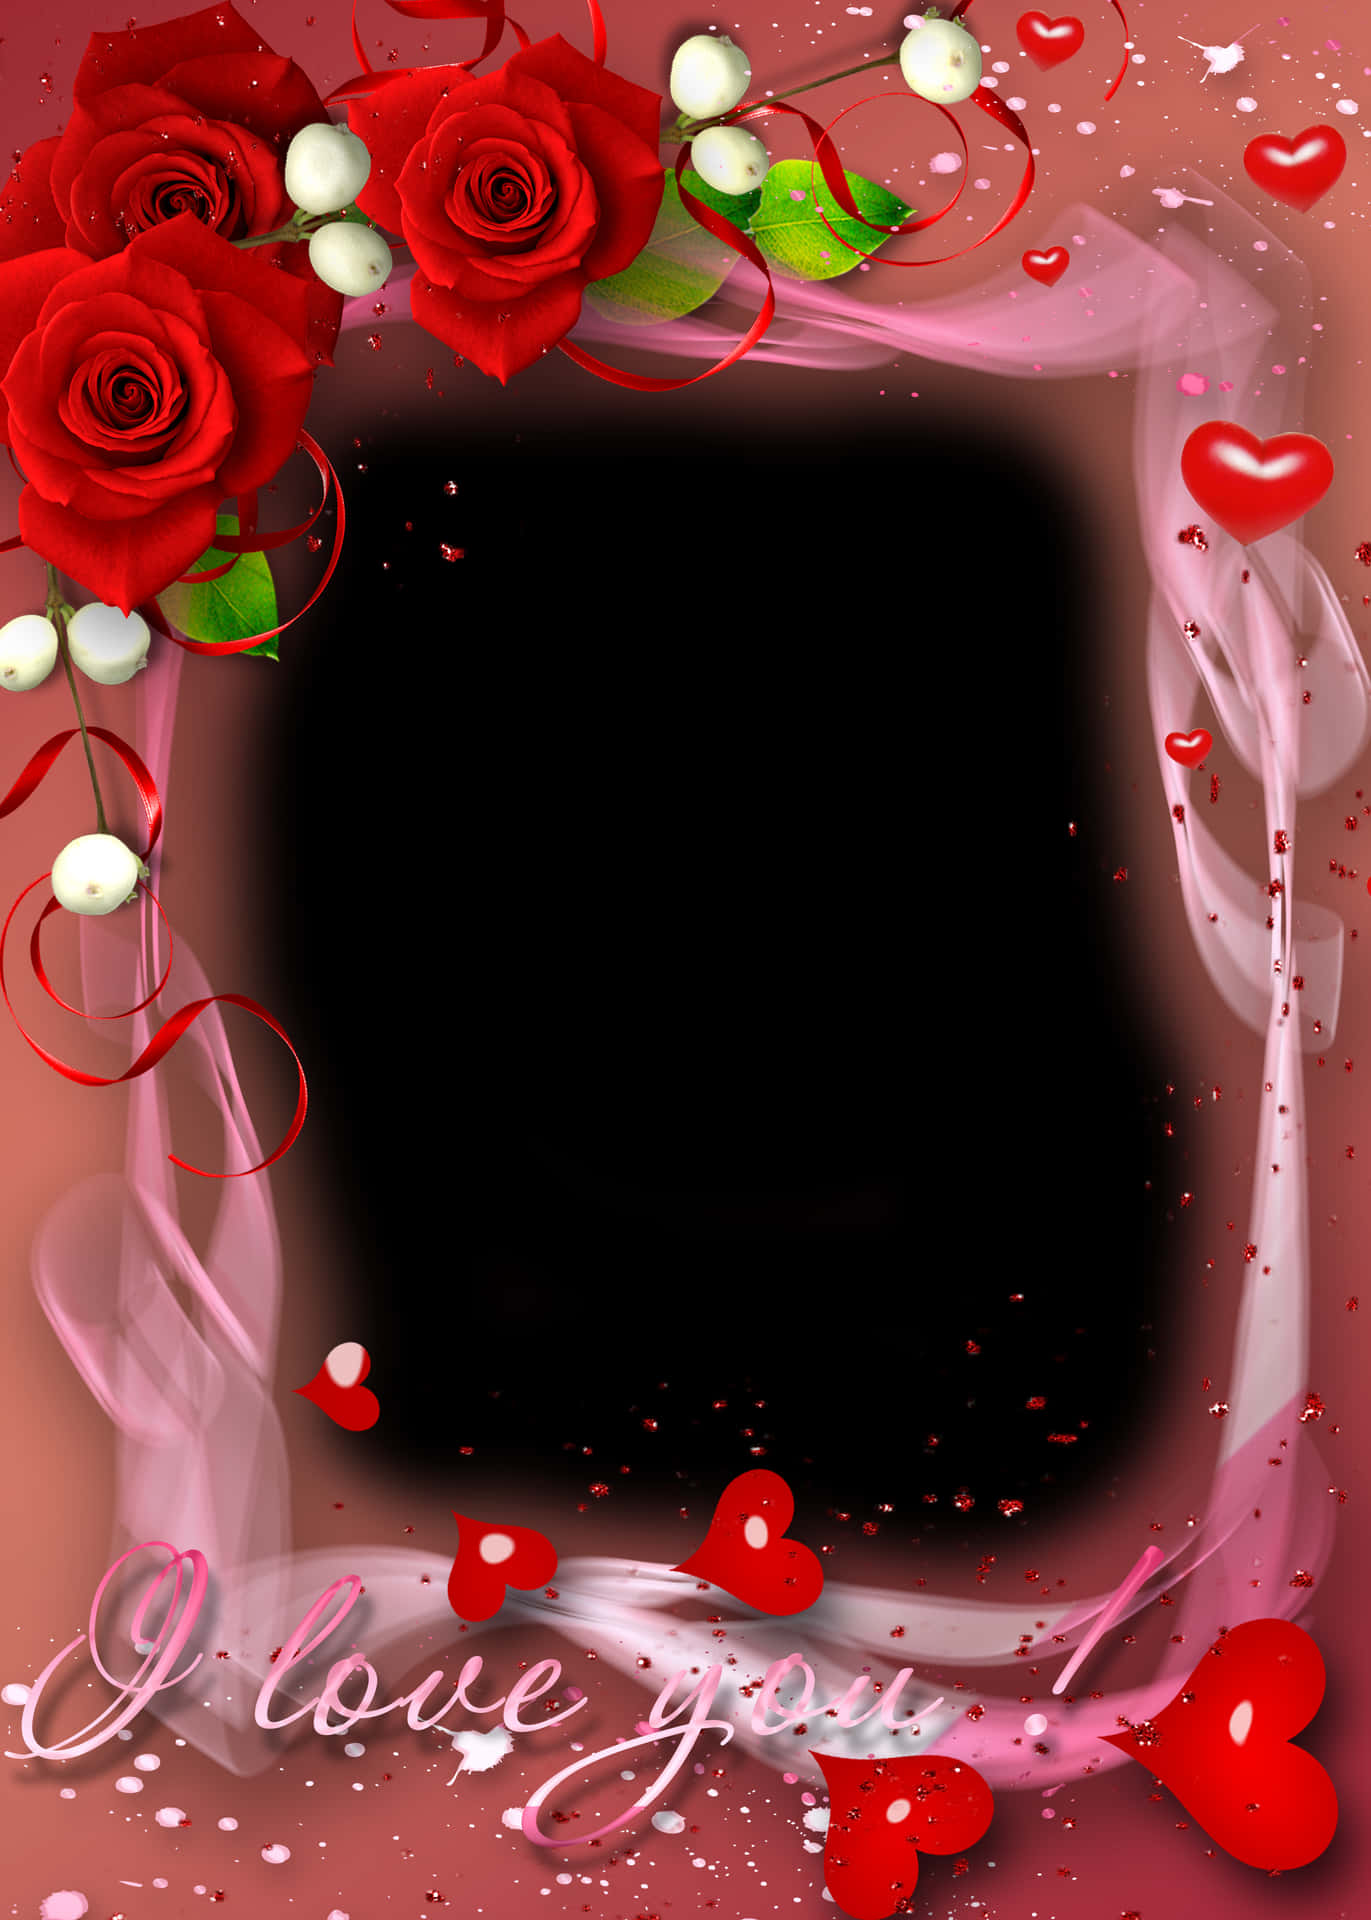 Romantic Red Roses Love Frame PNG image